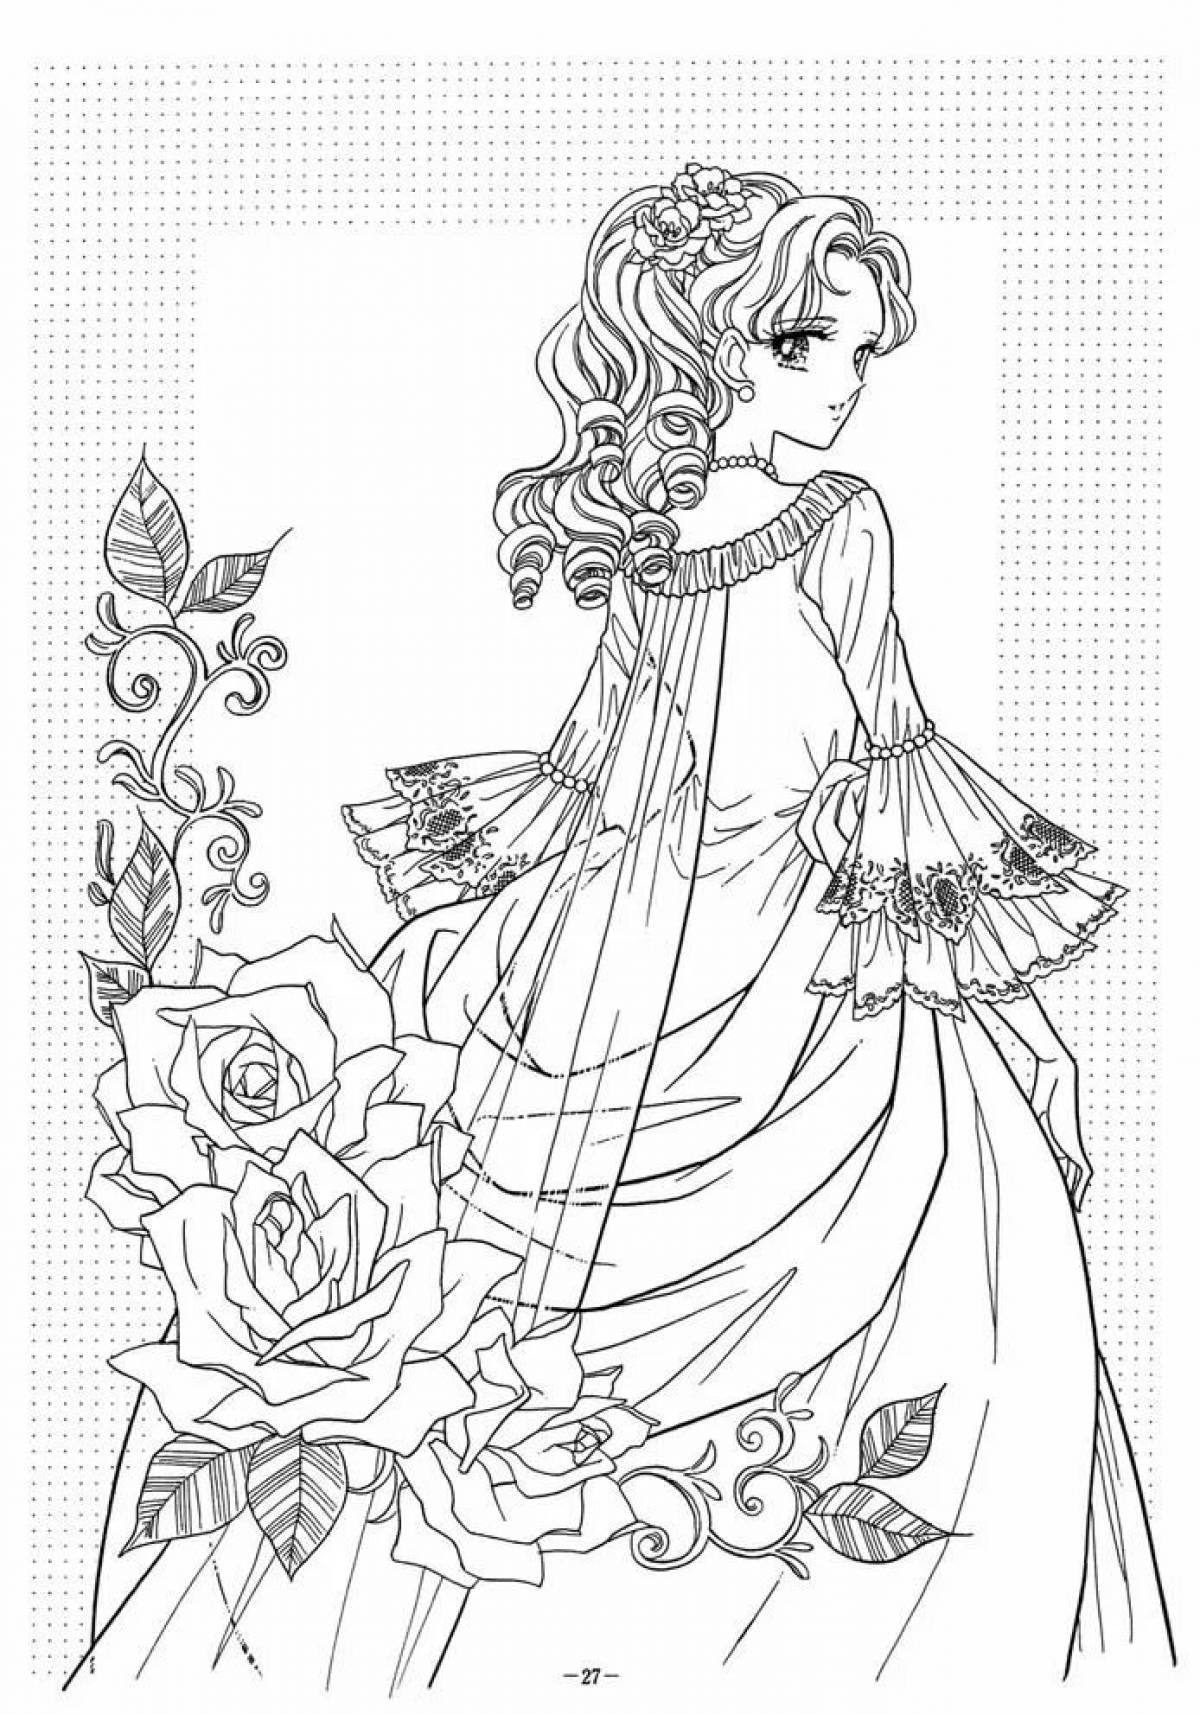 Coloring page exalted for girls princesses in beautiful dresses